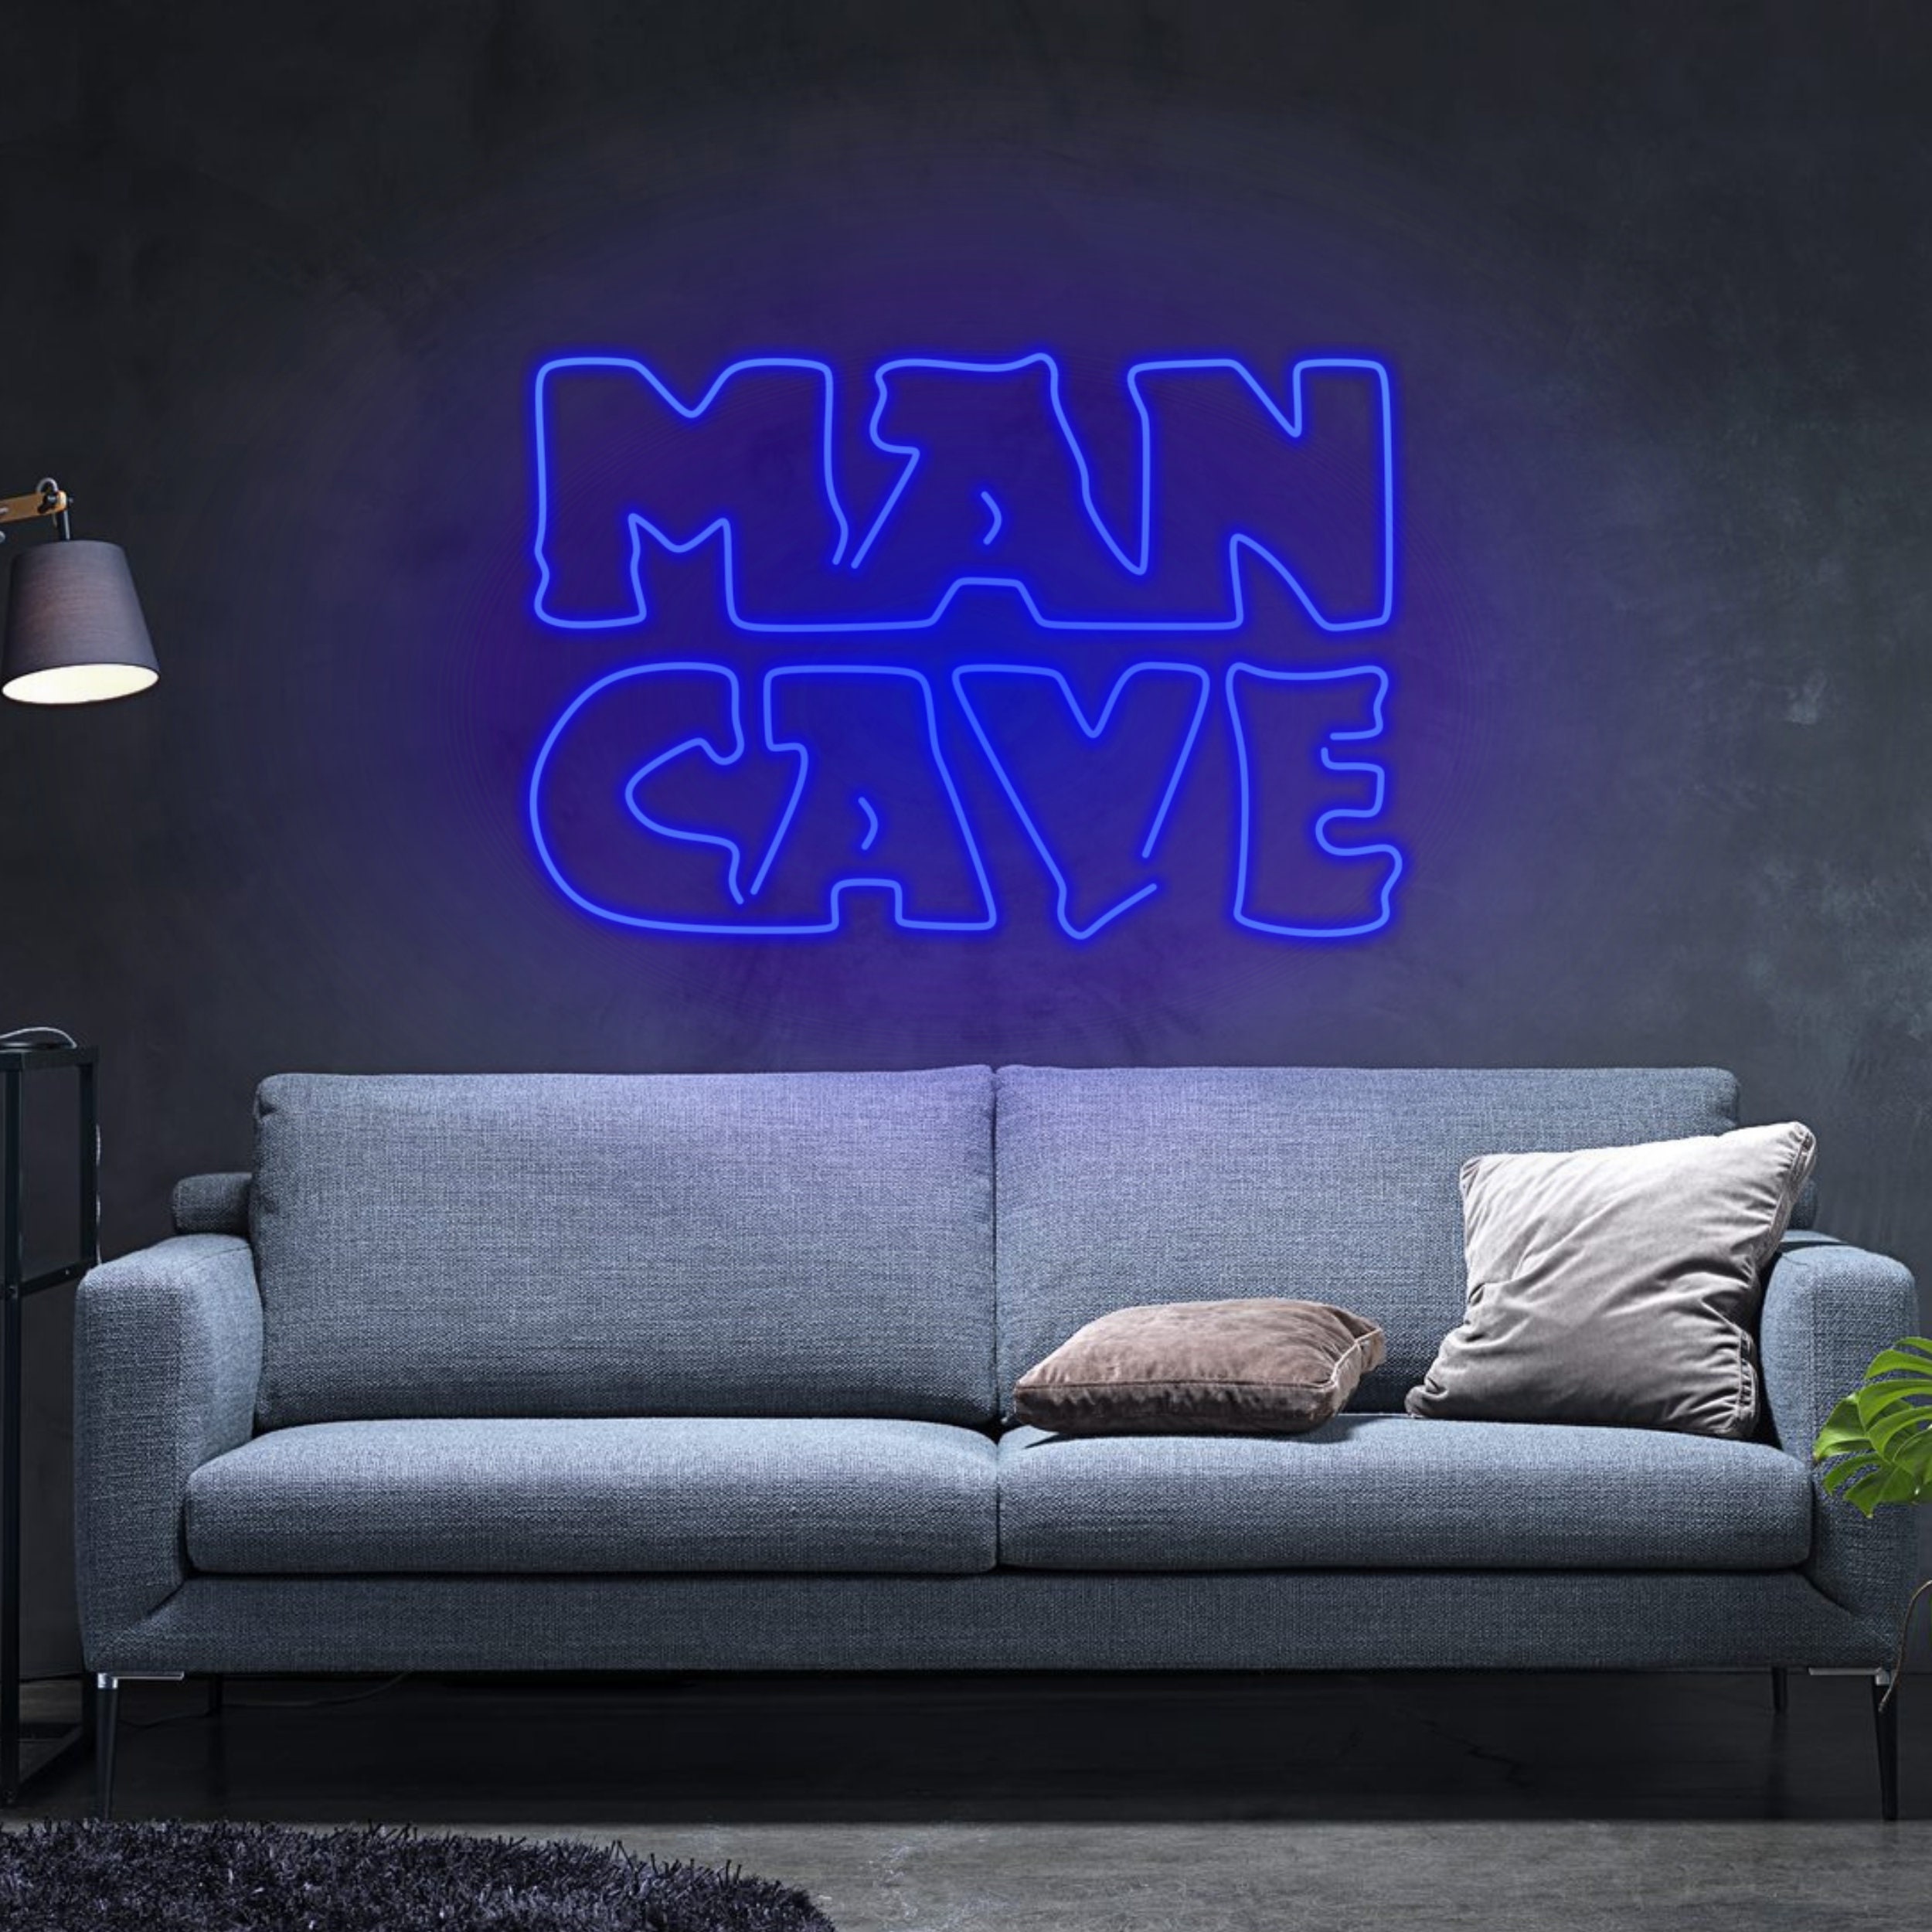 ALREAR Man Cave Sings and Decor, 12x8 Inches Aluminum Metal Wall Sign for  Bars, Cafes Pubs, Garage, Gifts for Men, Dad, Son